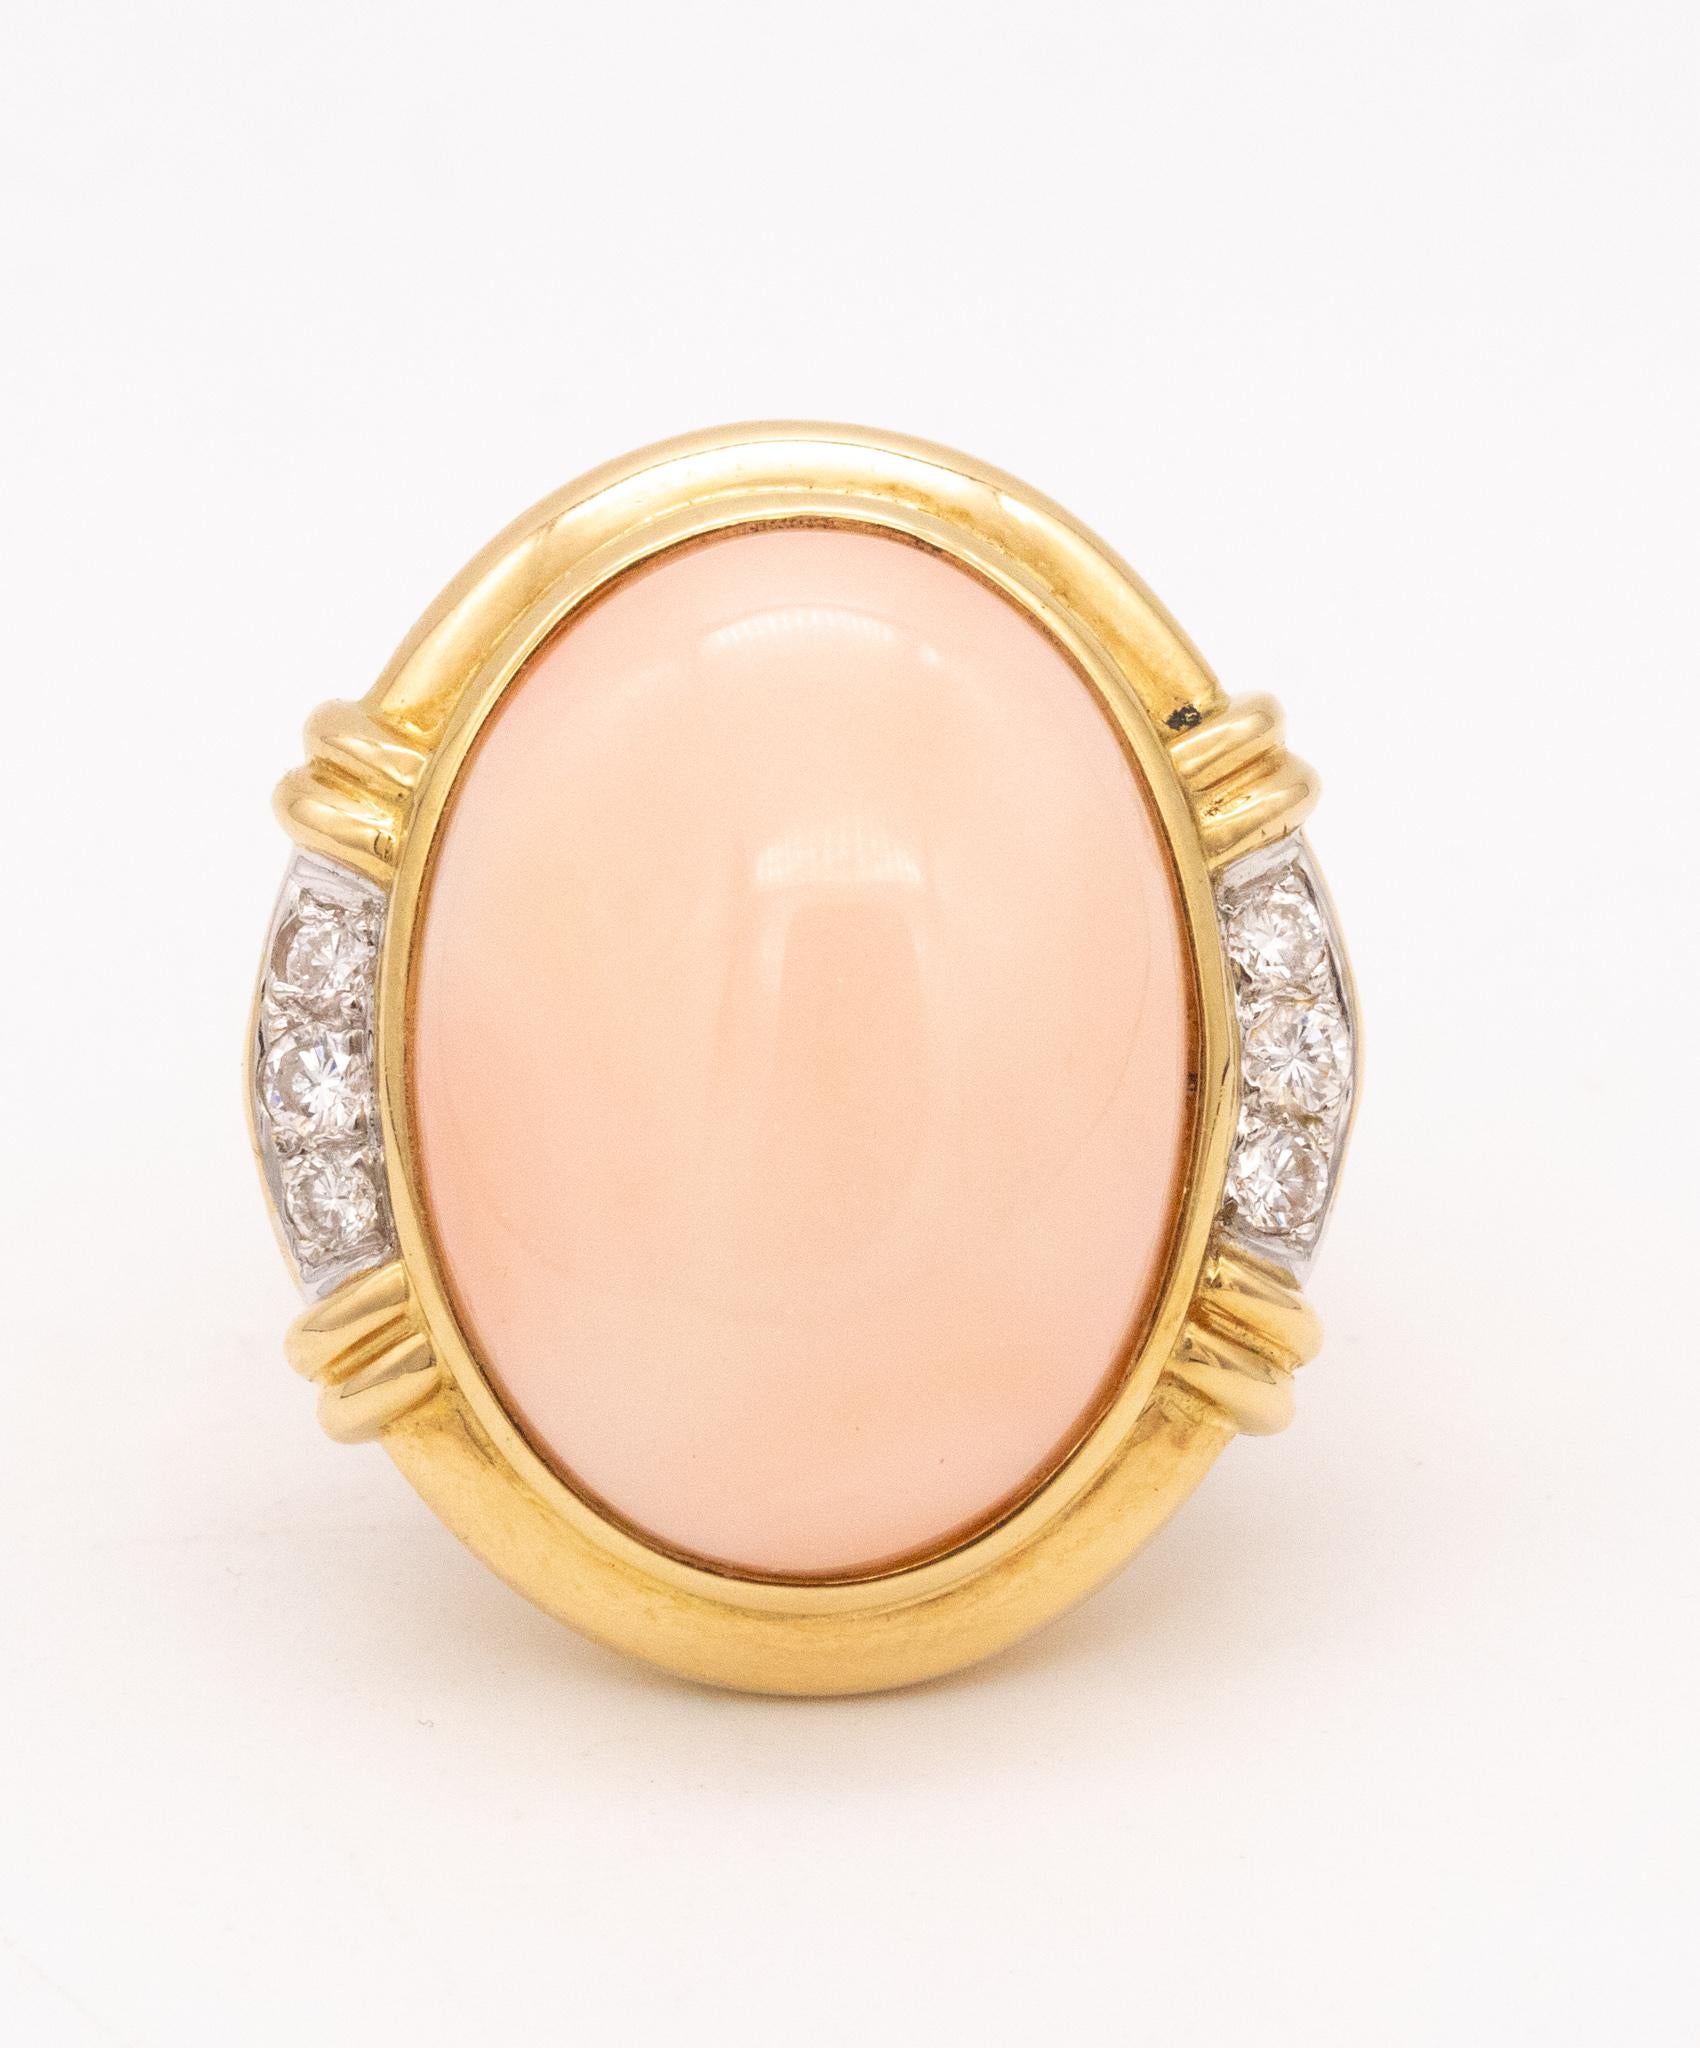 Women's Italian Modern Cocktail Ring in 18kt Gold with 25.54 Cts Diamonds and Pink Coral For Sale